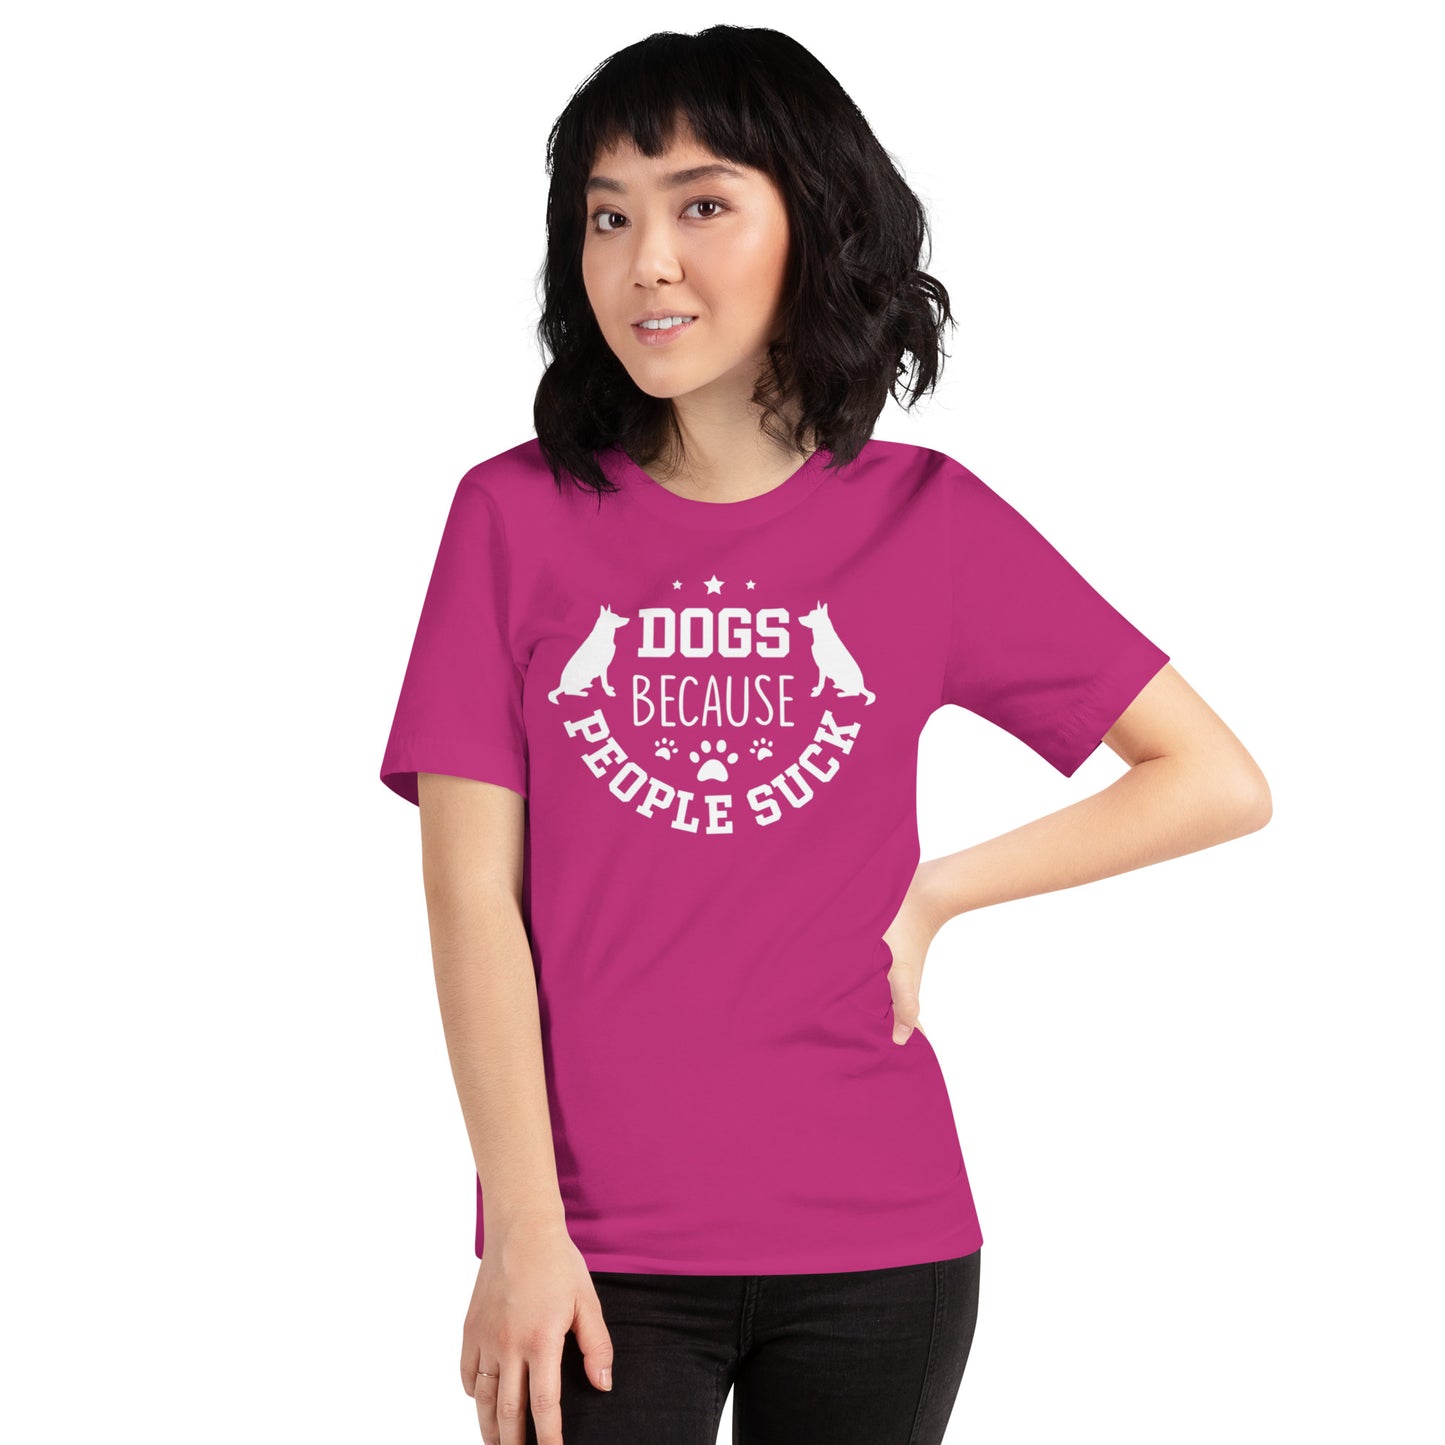 Dogs Because People Suck Unisex t-shirt